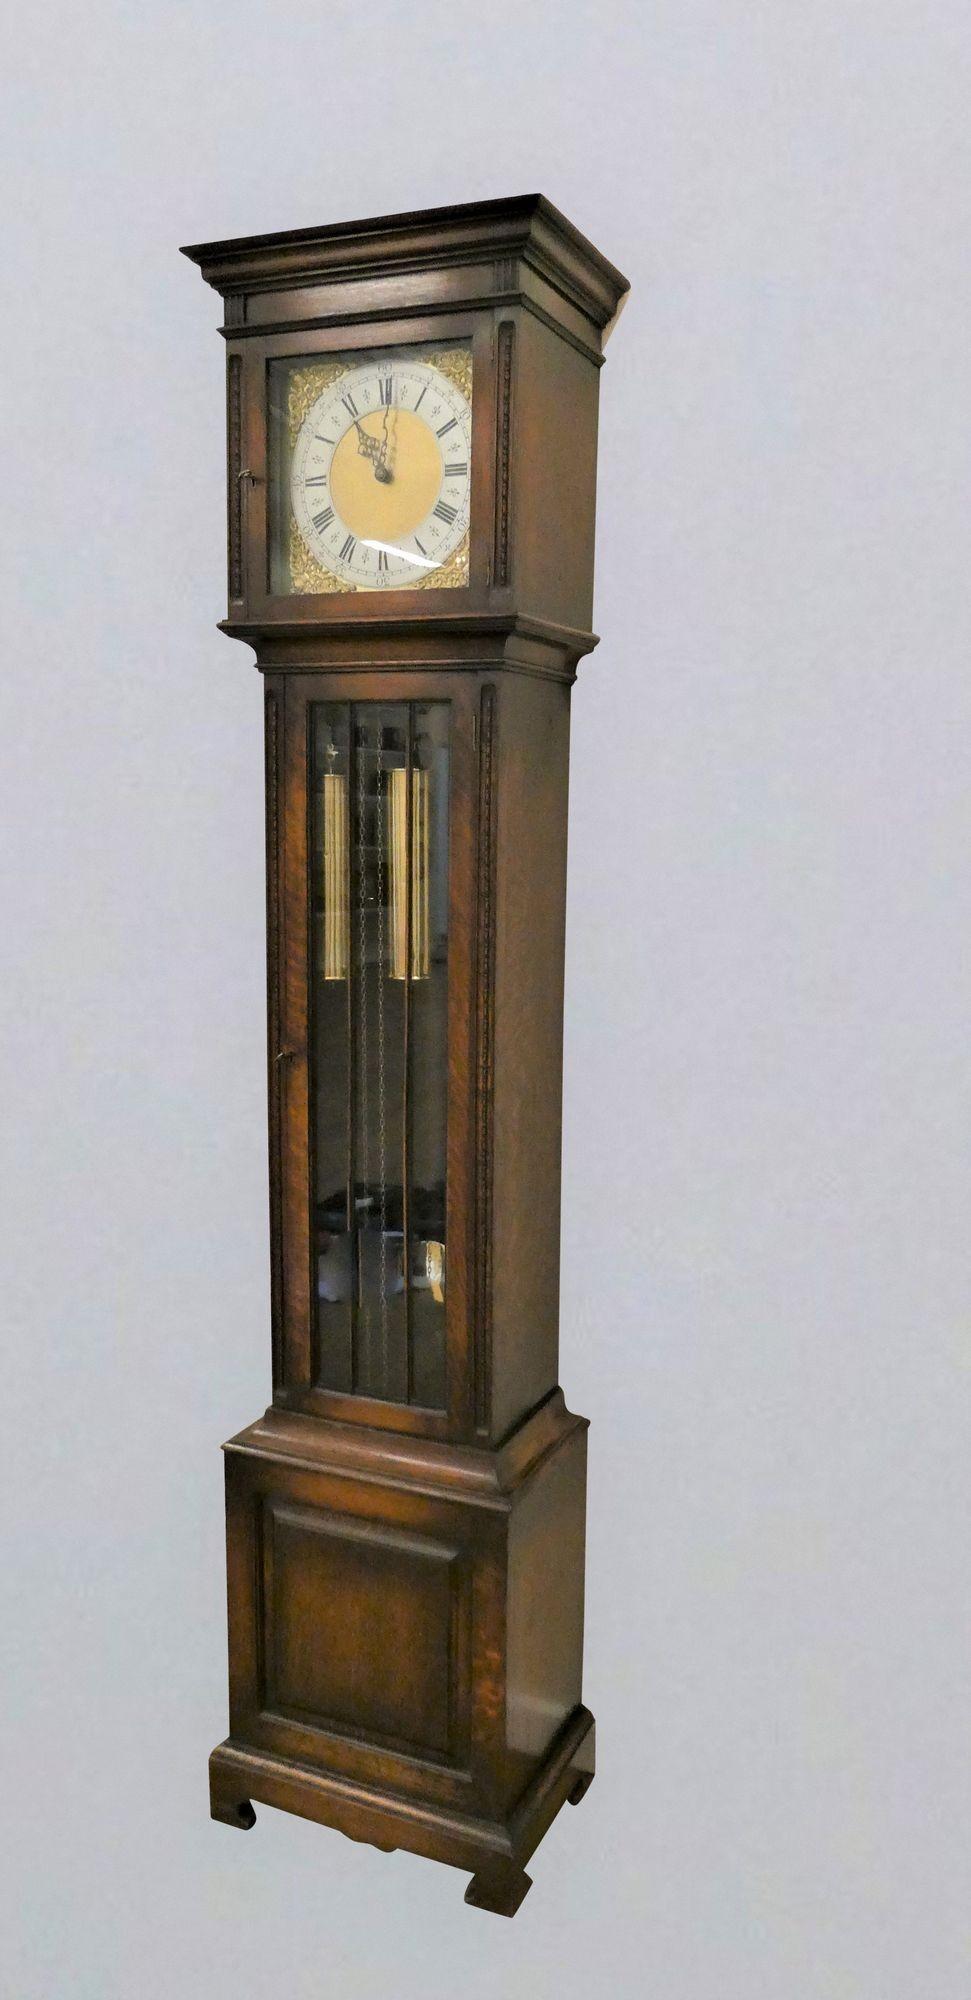 Edwardian Westminster Chiming Longcase Clock
 
Edwardian Longcase clock housed in an oak case, glazed front opening door with beaded decoration.  Raised, stepped plinth with central panel, flat top hood with beaded decoration to both sides of the